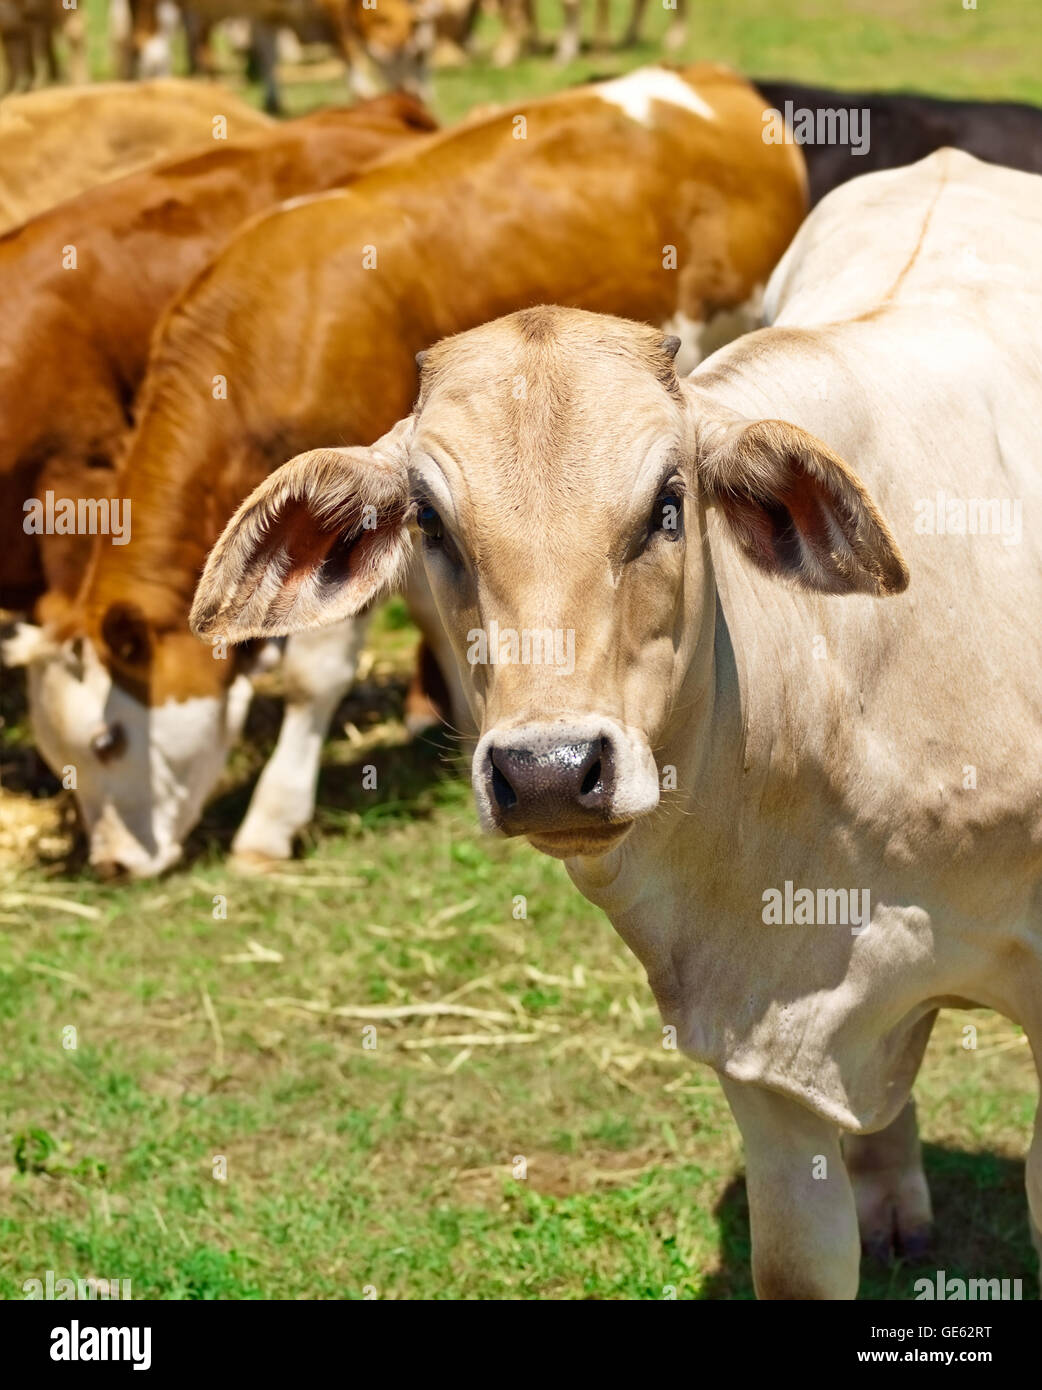 australian beef cattle brown and white grazing Stock Photo